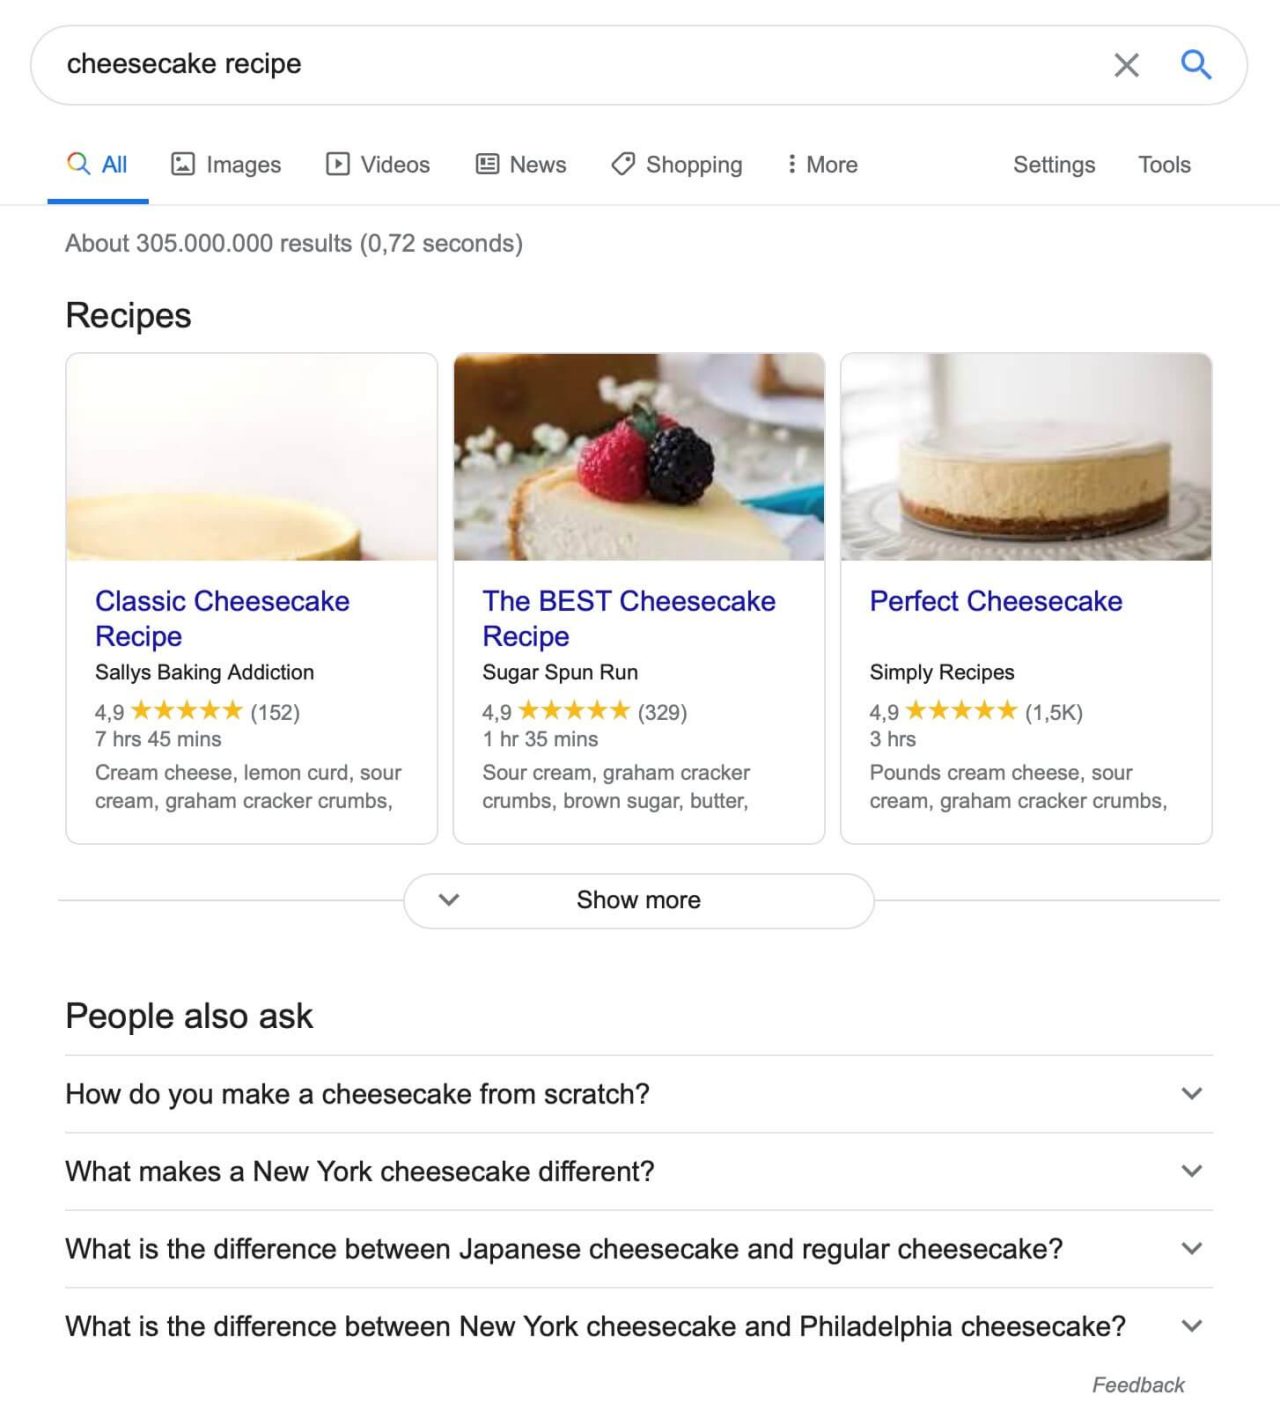 Using Structured Data on Google Search Results